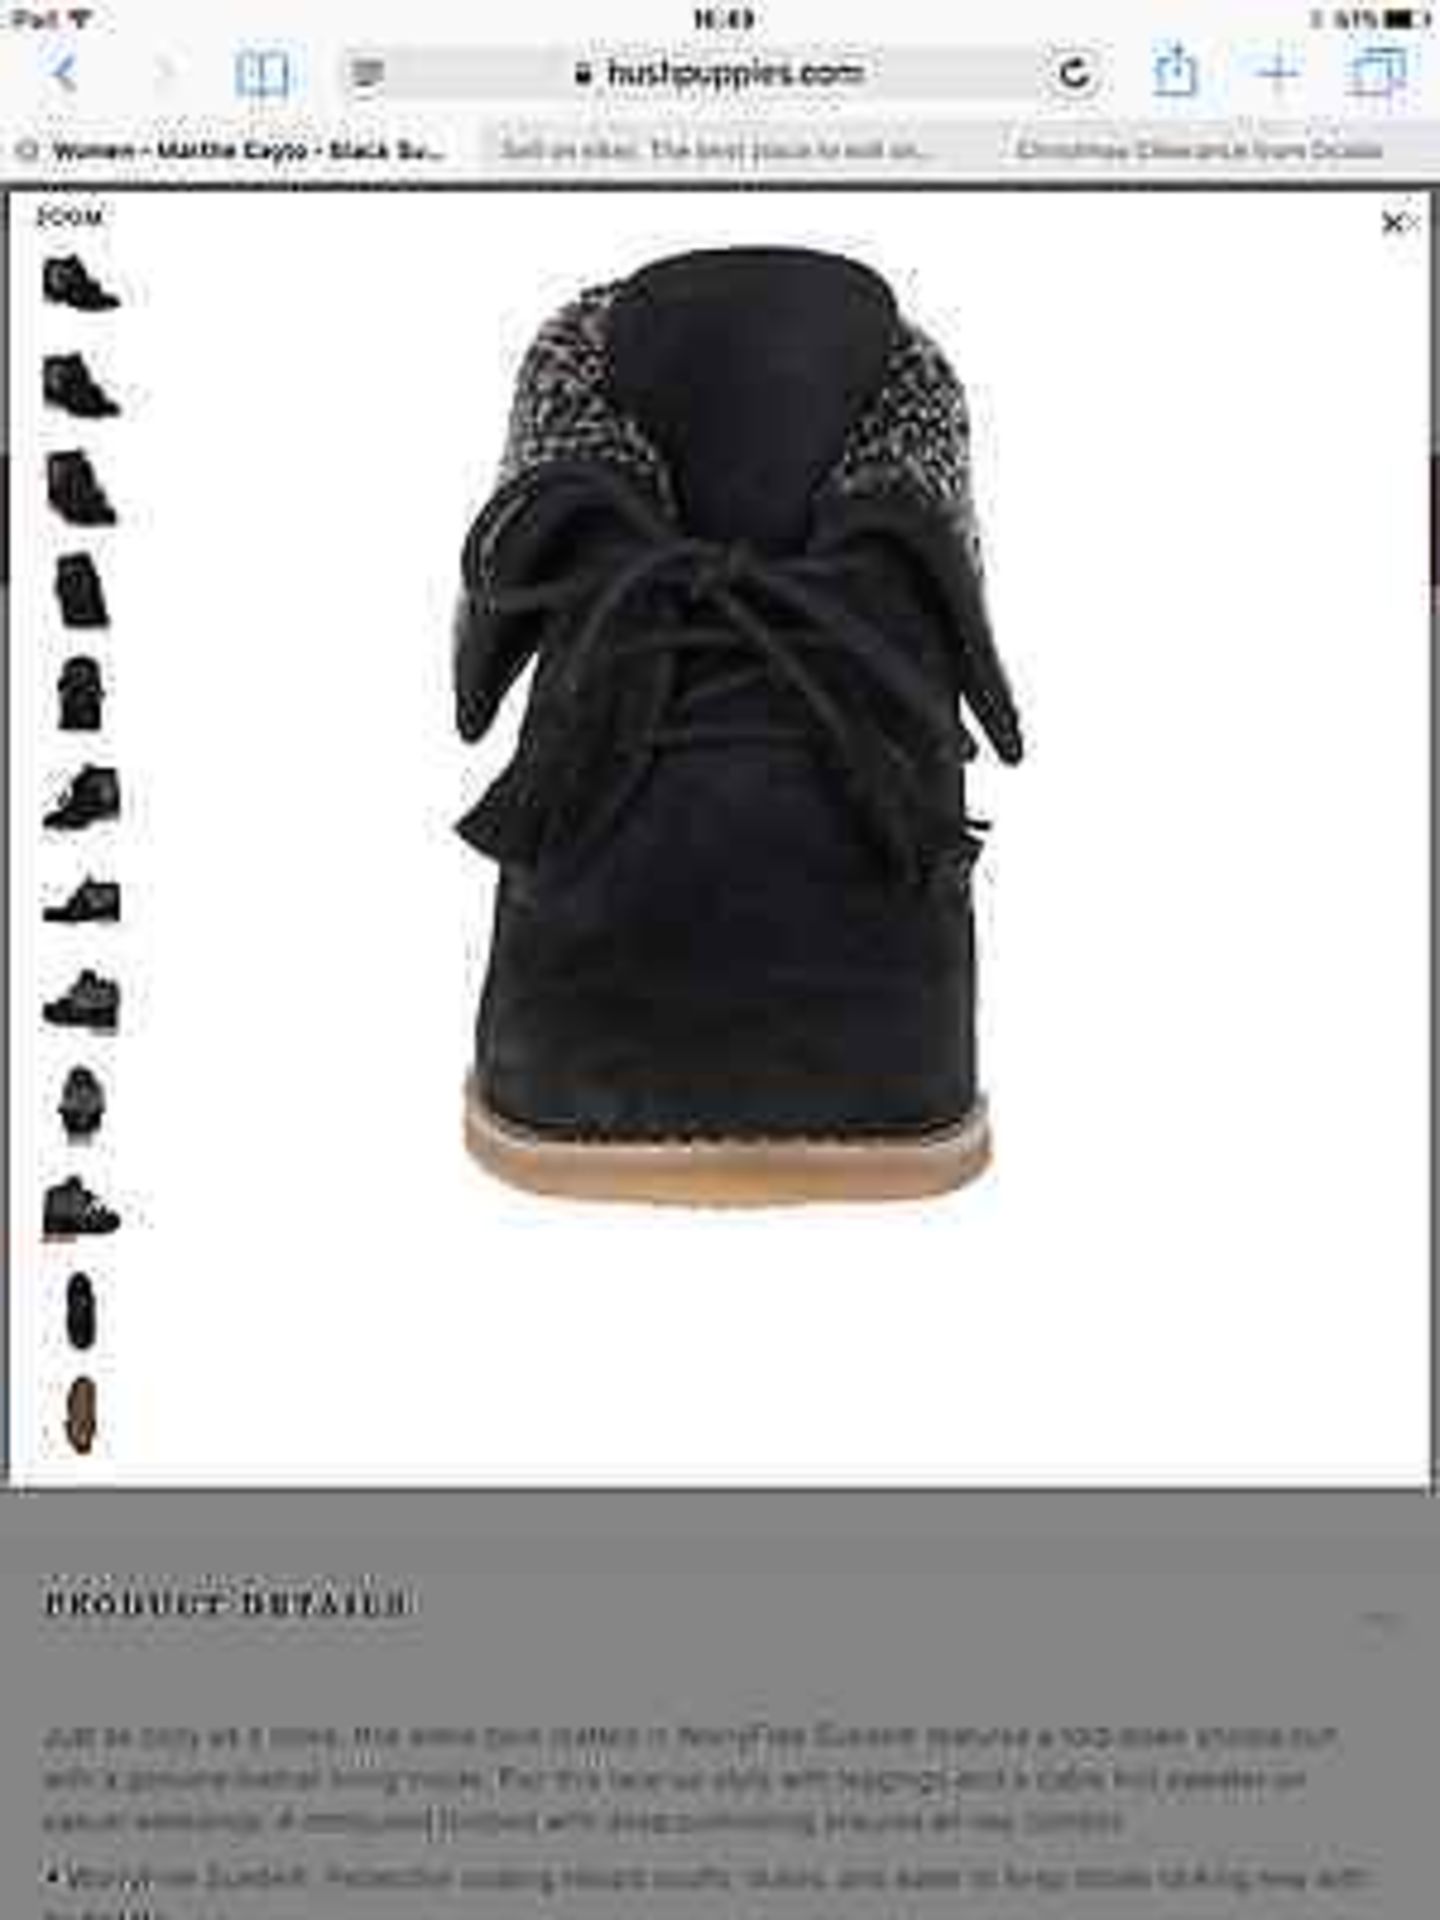 Hush Puppies Black Suede Martha Cayto Ankle Boot, Size UK 7, RRP £100 (New with box) [Ref: ] - Image 6 of 12